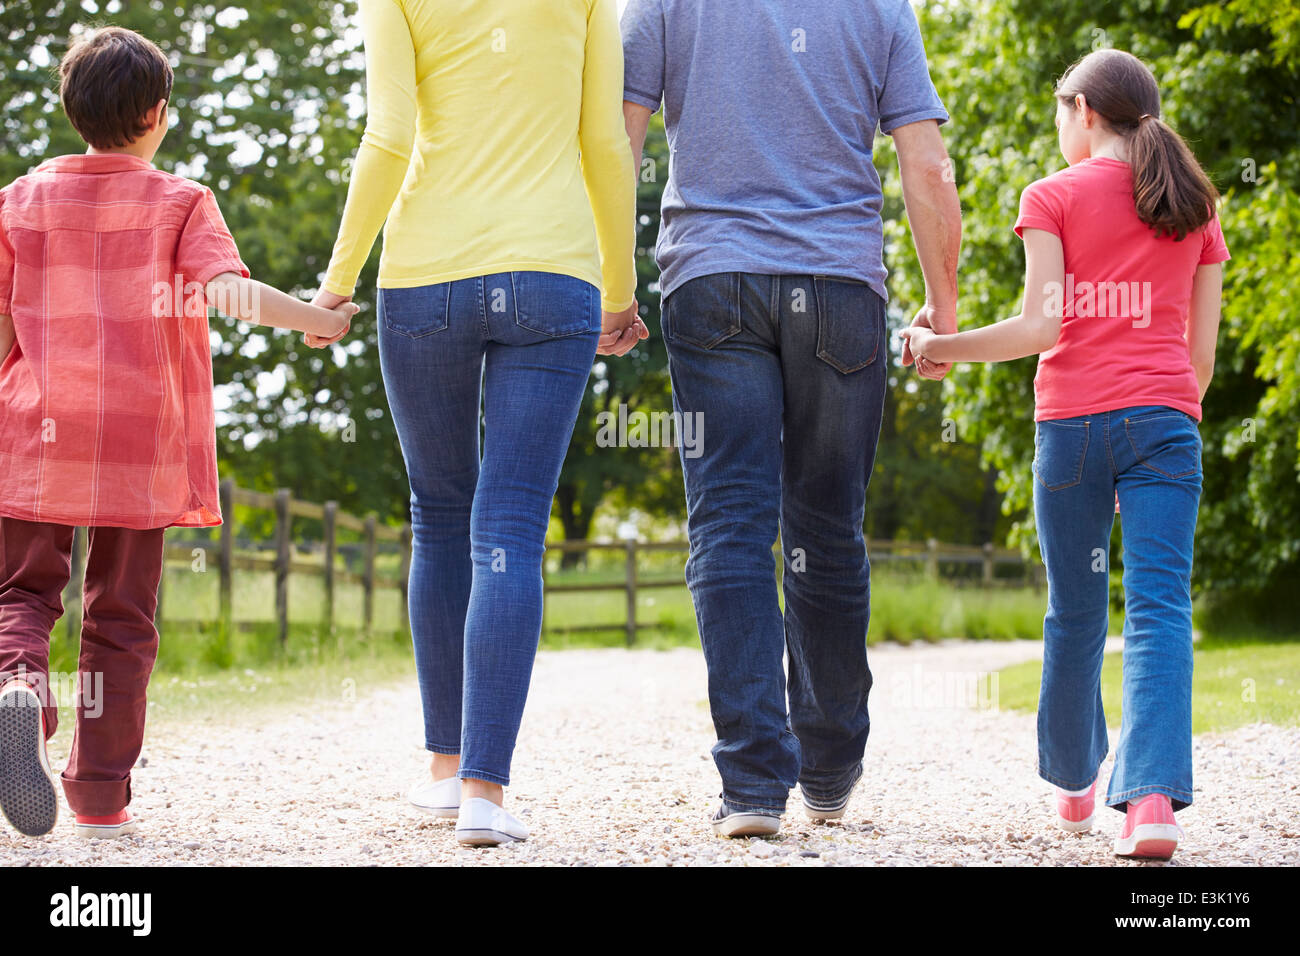 Rear View Of Hispanic Family Walking In Countryside Stock Photo